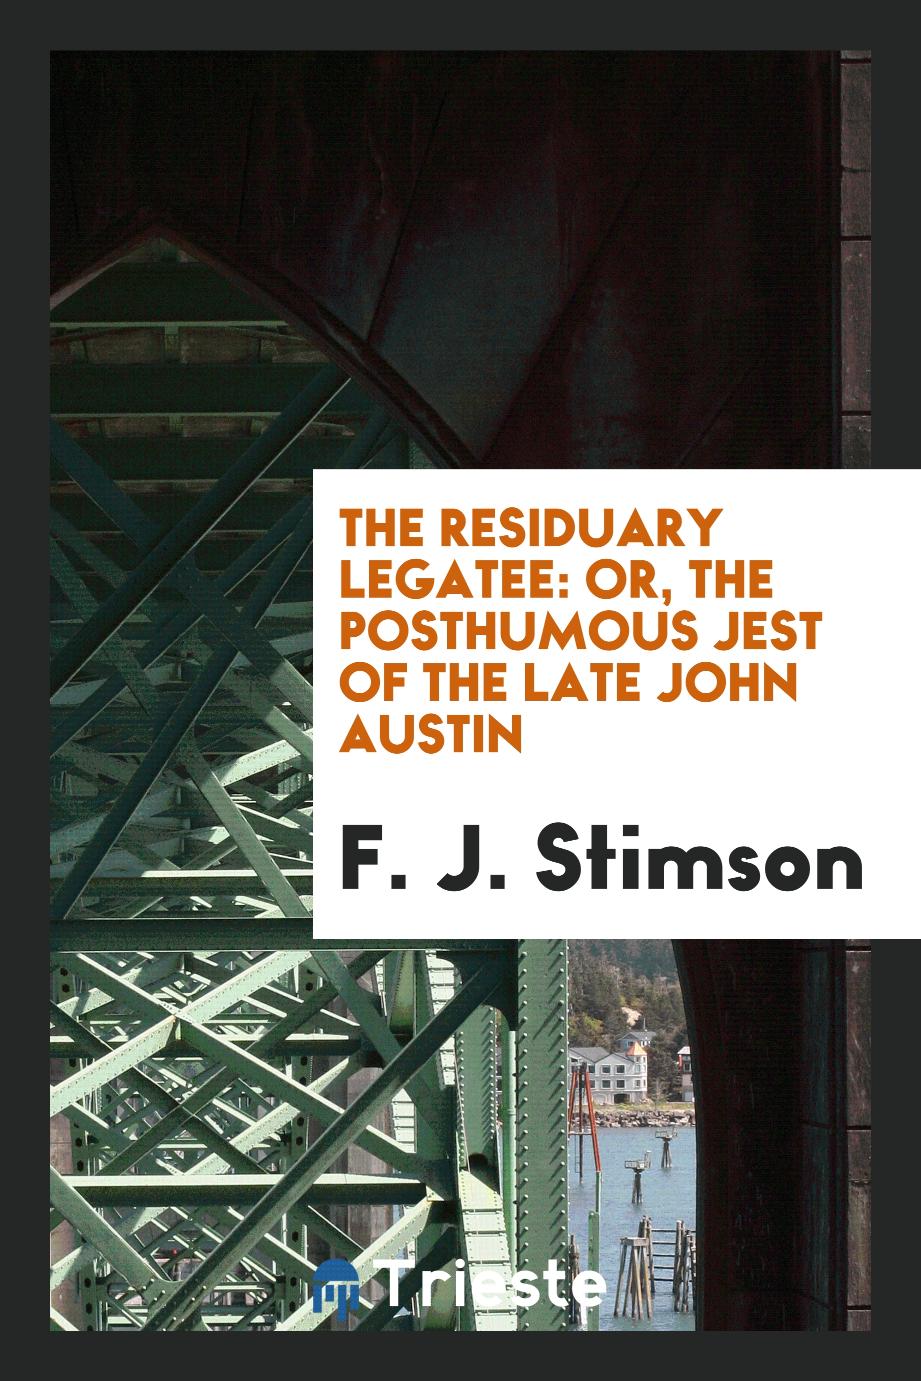 The Residuary Legatee: Or, The Posthumous Jest of the Late John Austin